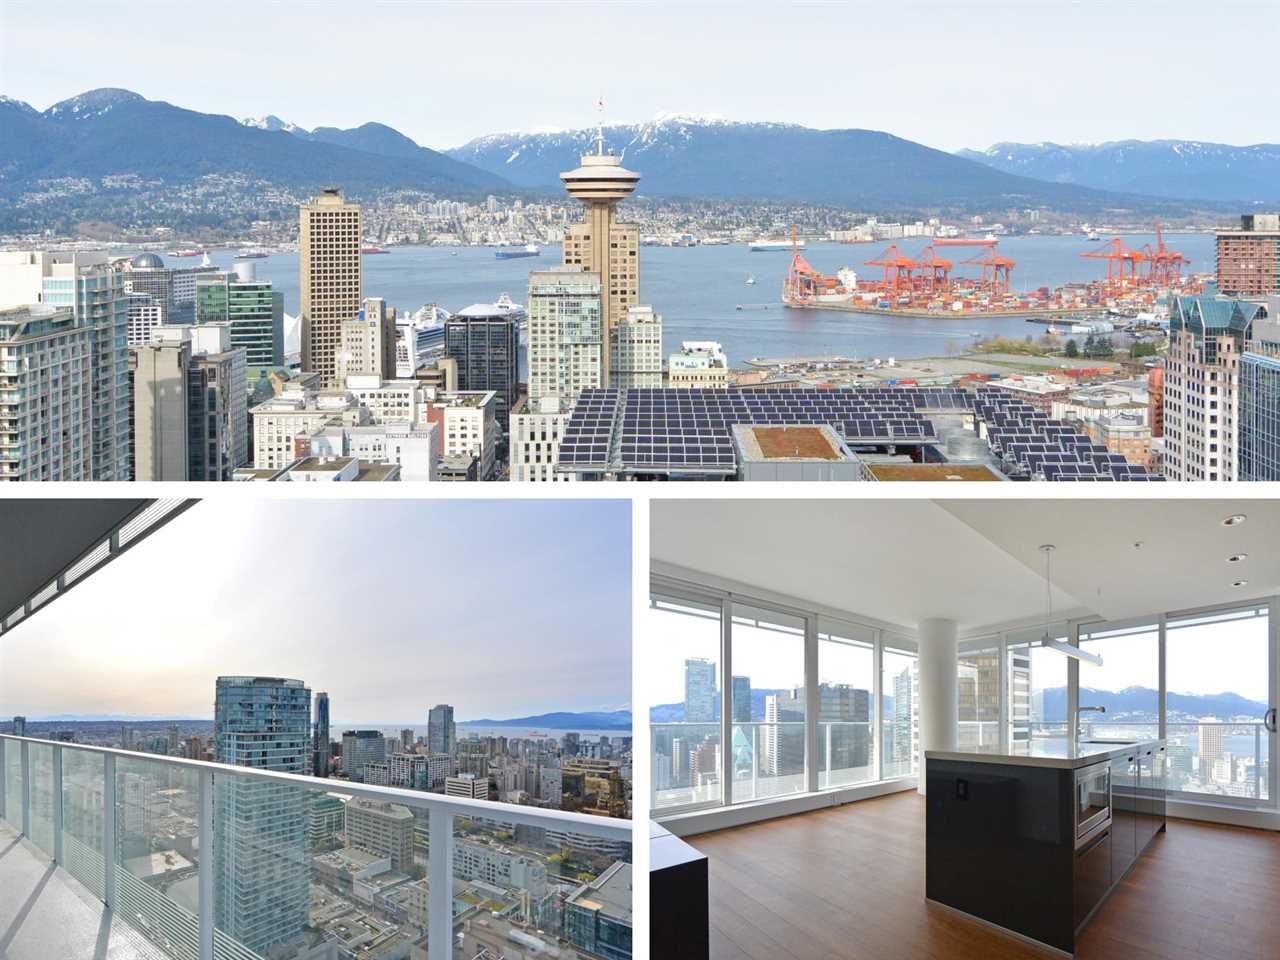 Main Photo: 4305 777 RICHARDS STREET in : Downtown VW Condo for sale (Vancouver West)  : MLS®# R2150629